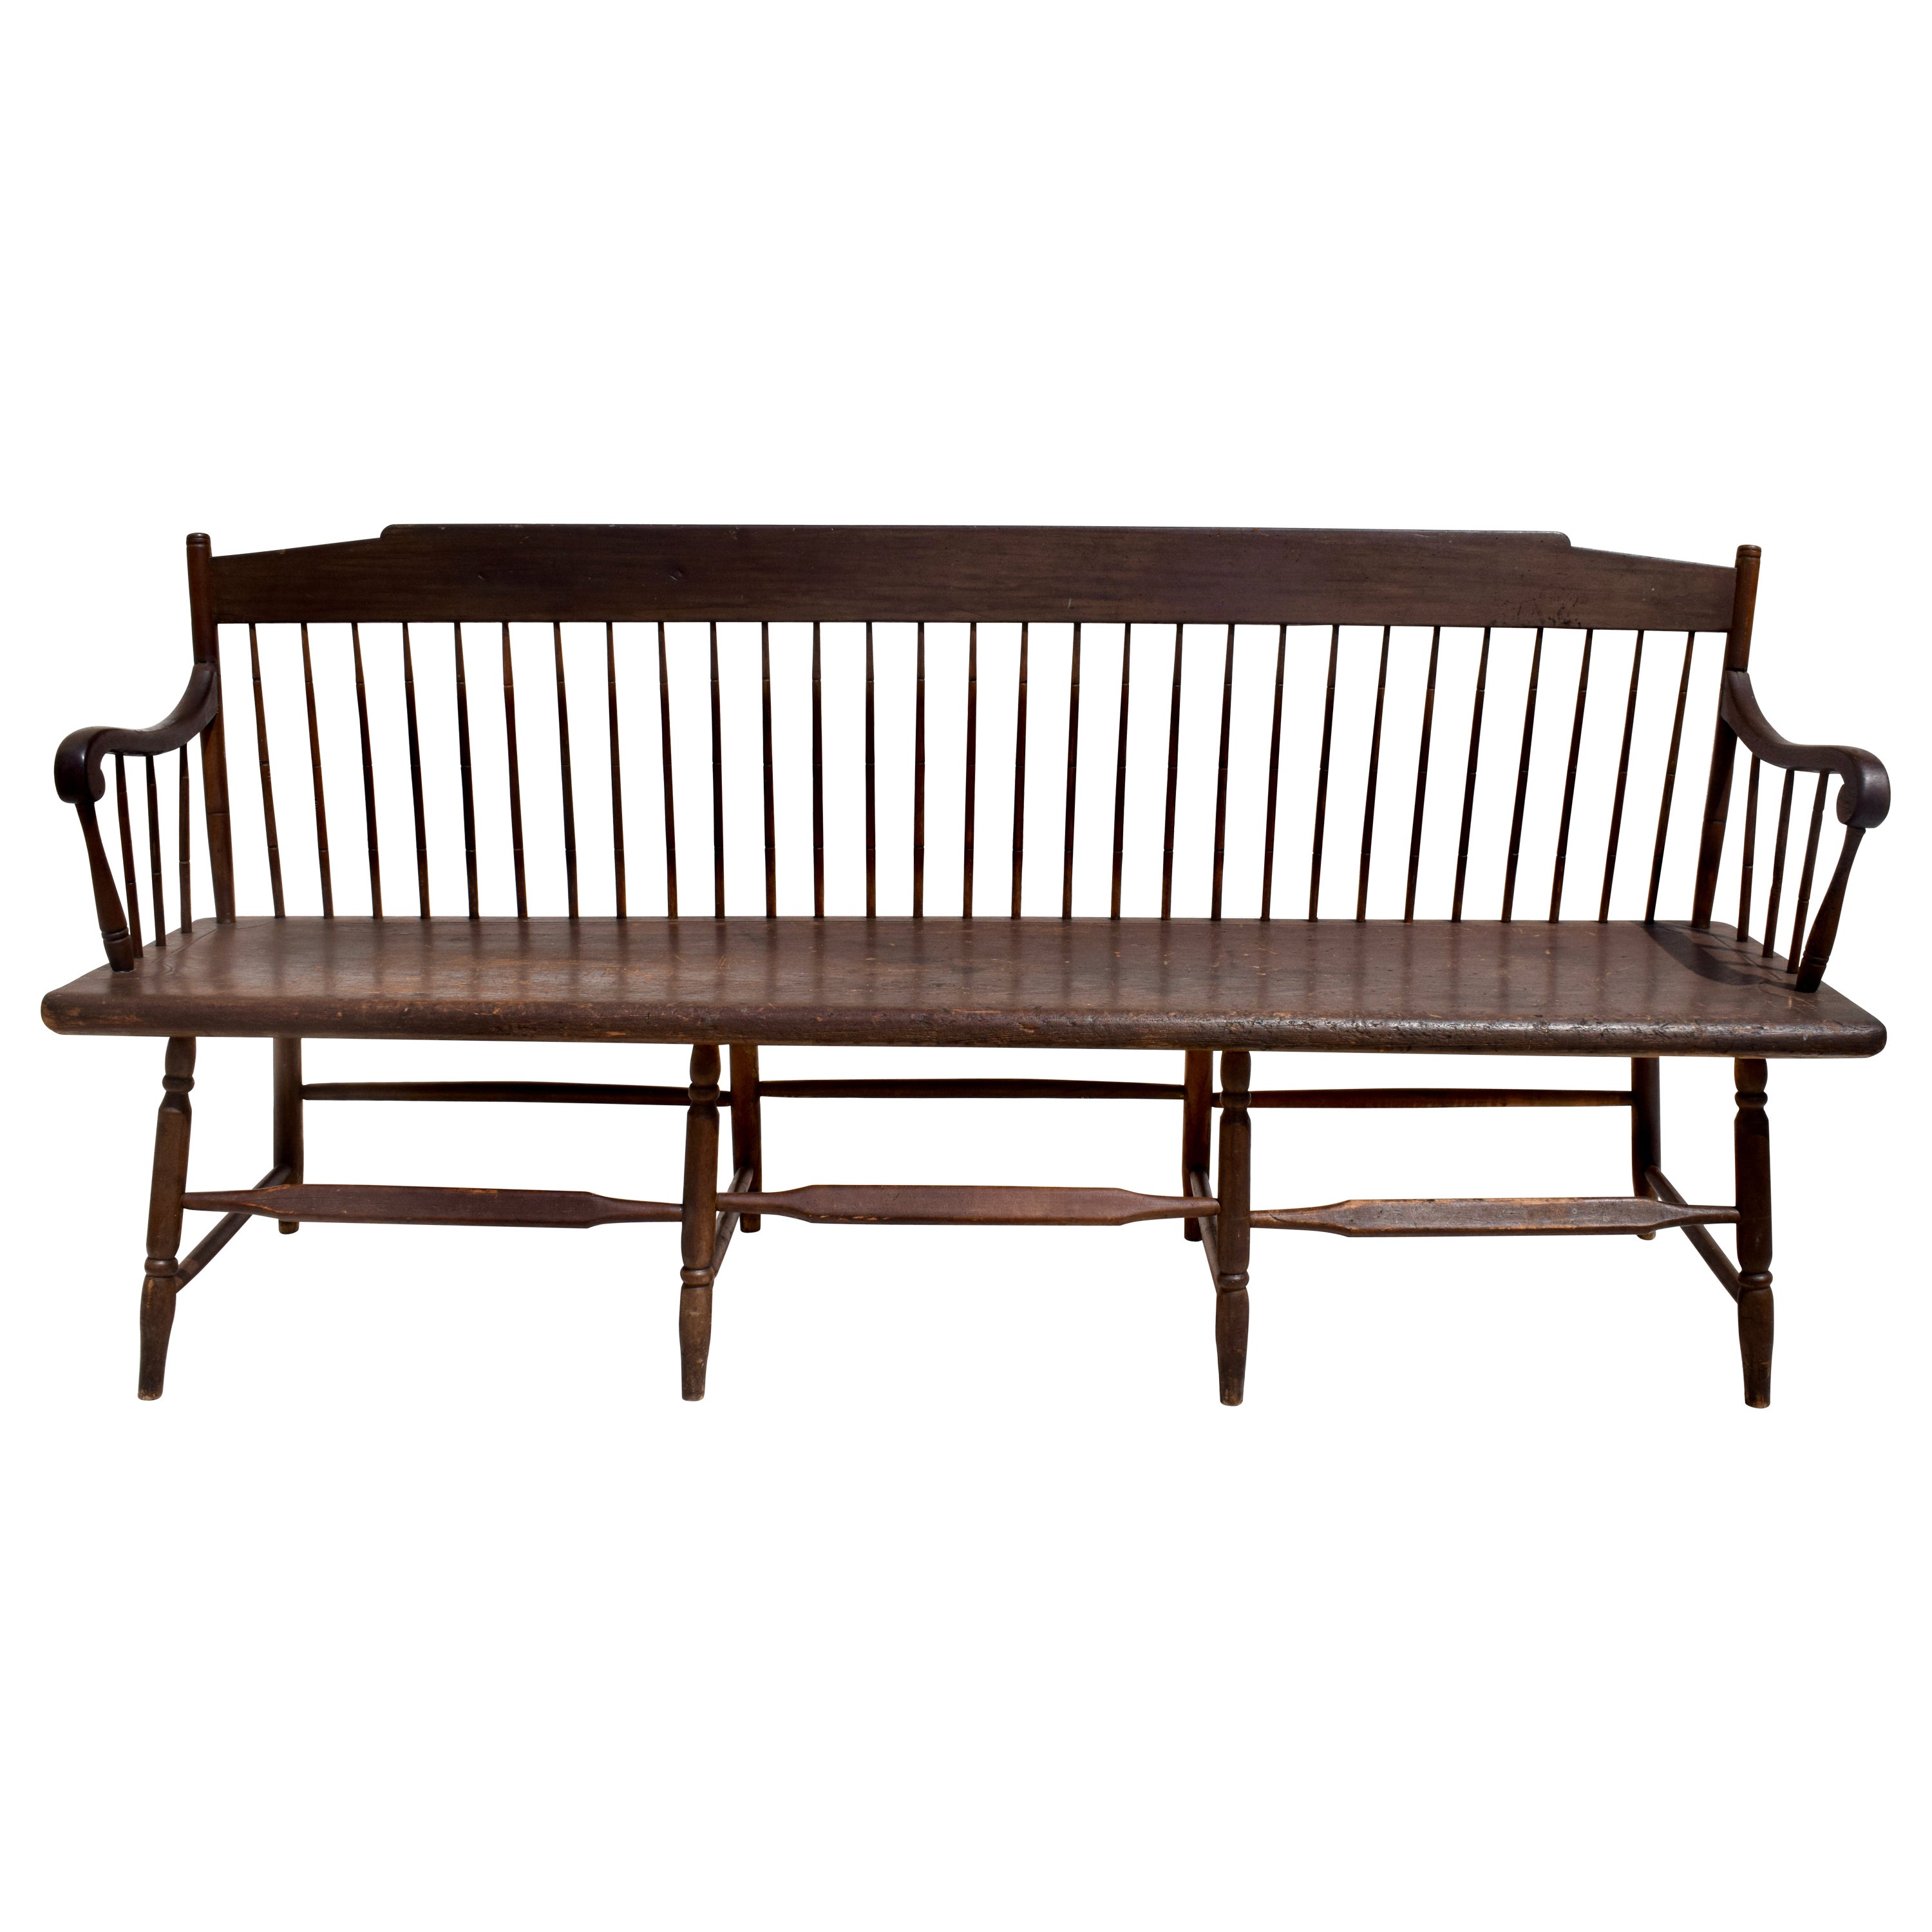 American Windsor Bench Early 19th C.